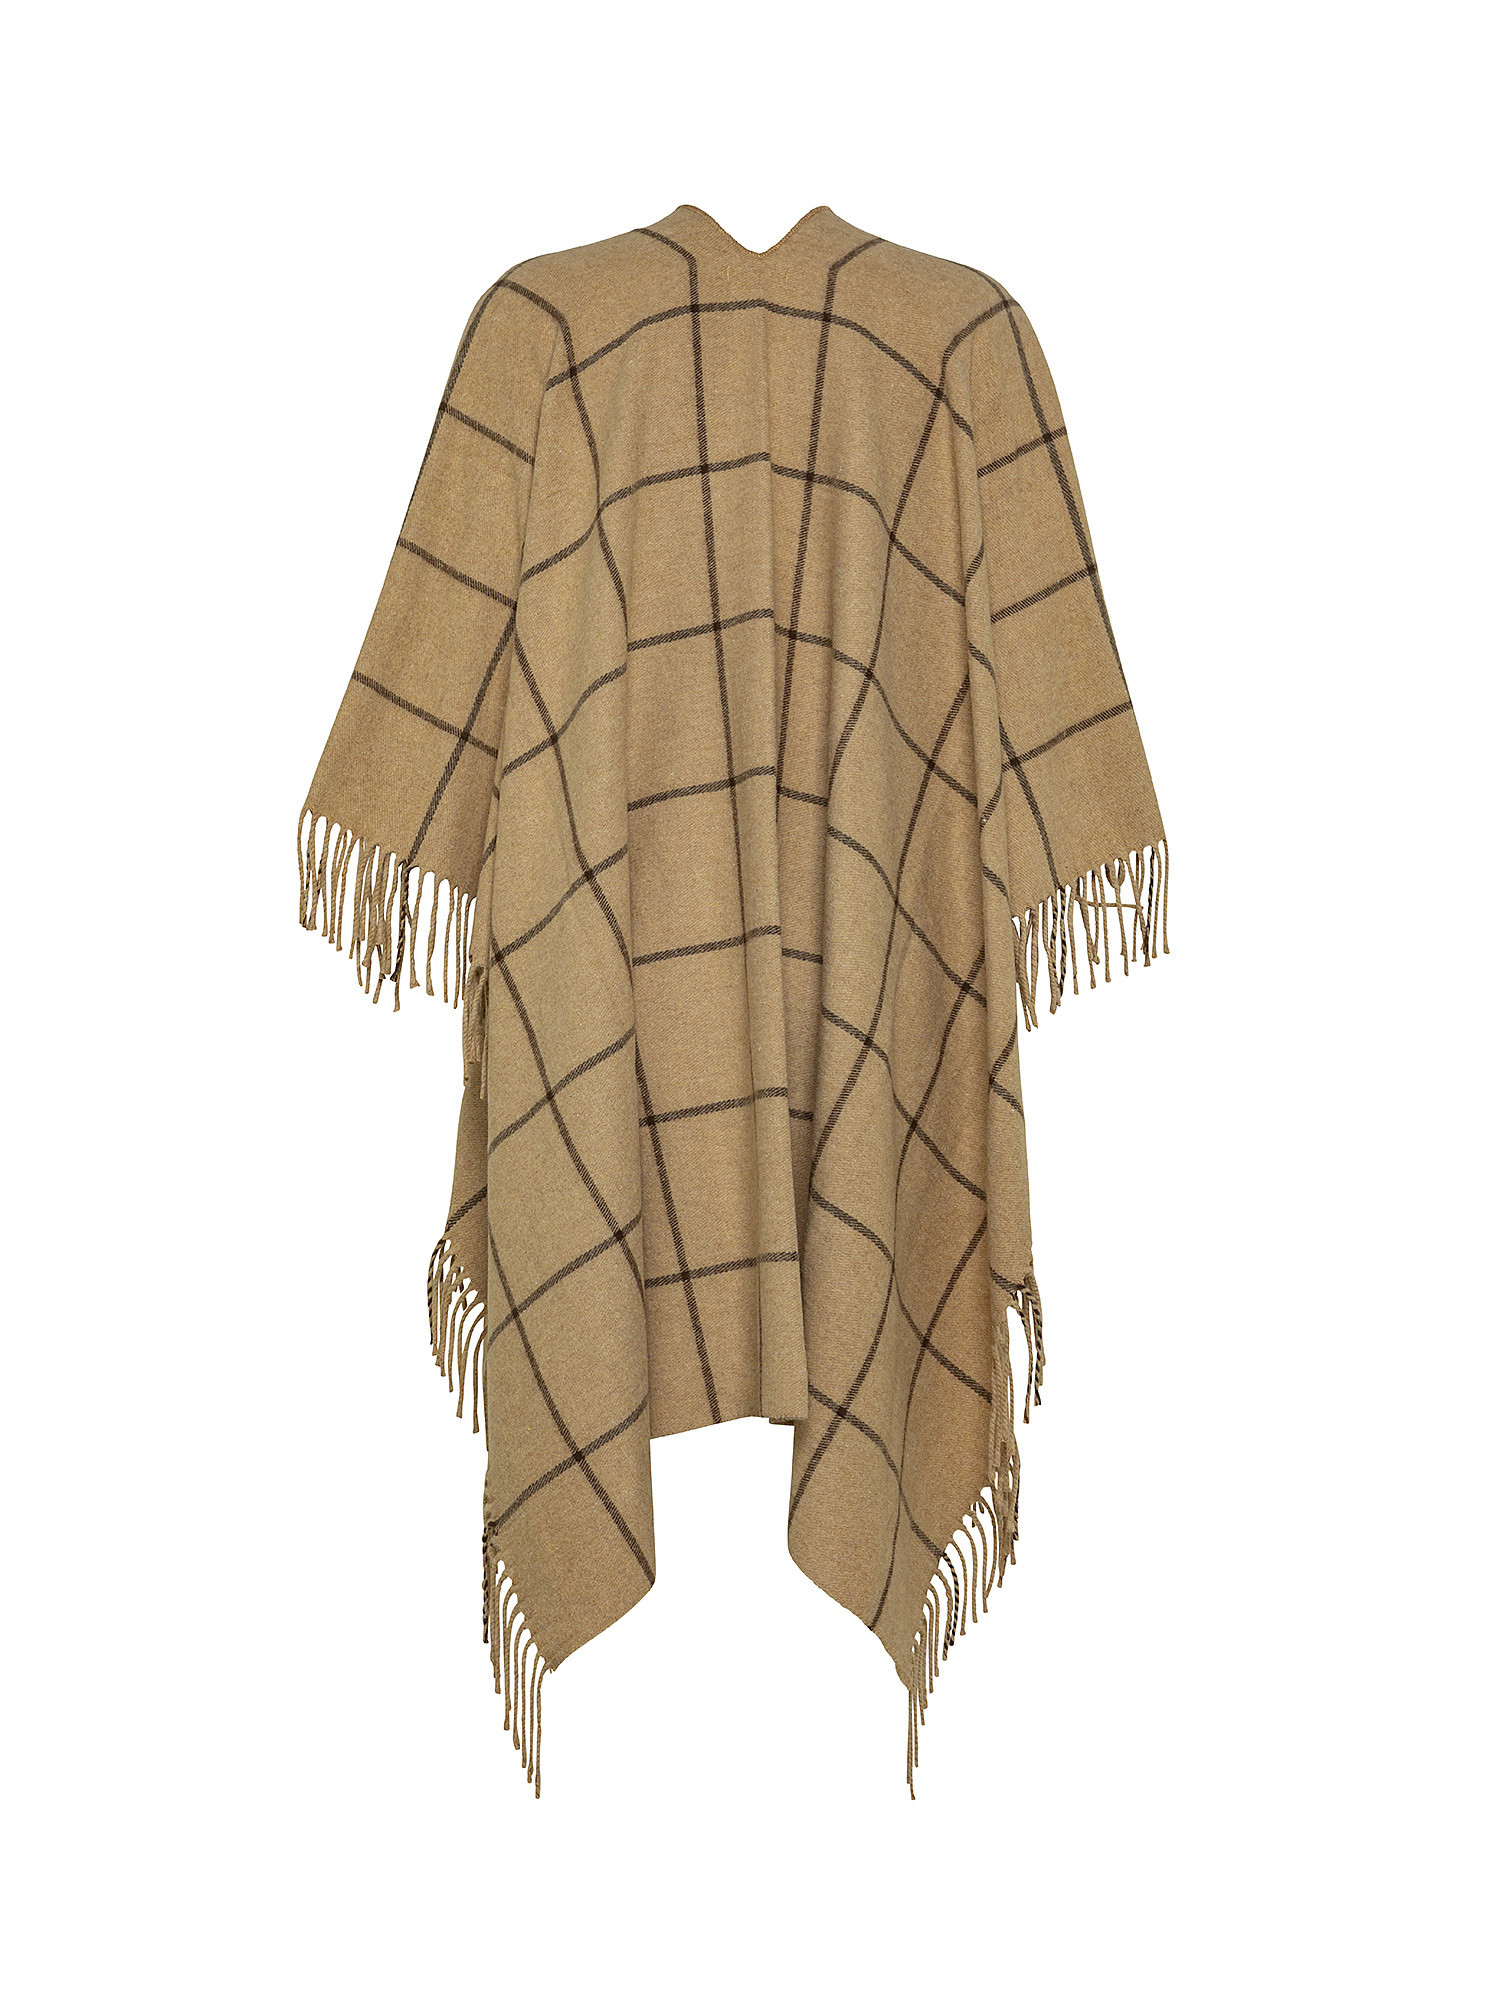 Two-tone poncho with window design, Beige, large image number 1